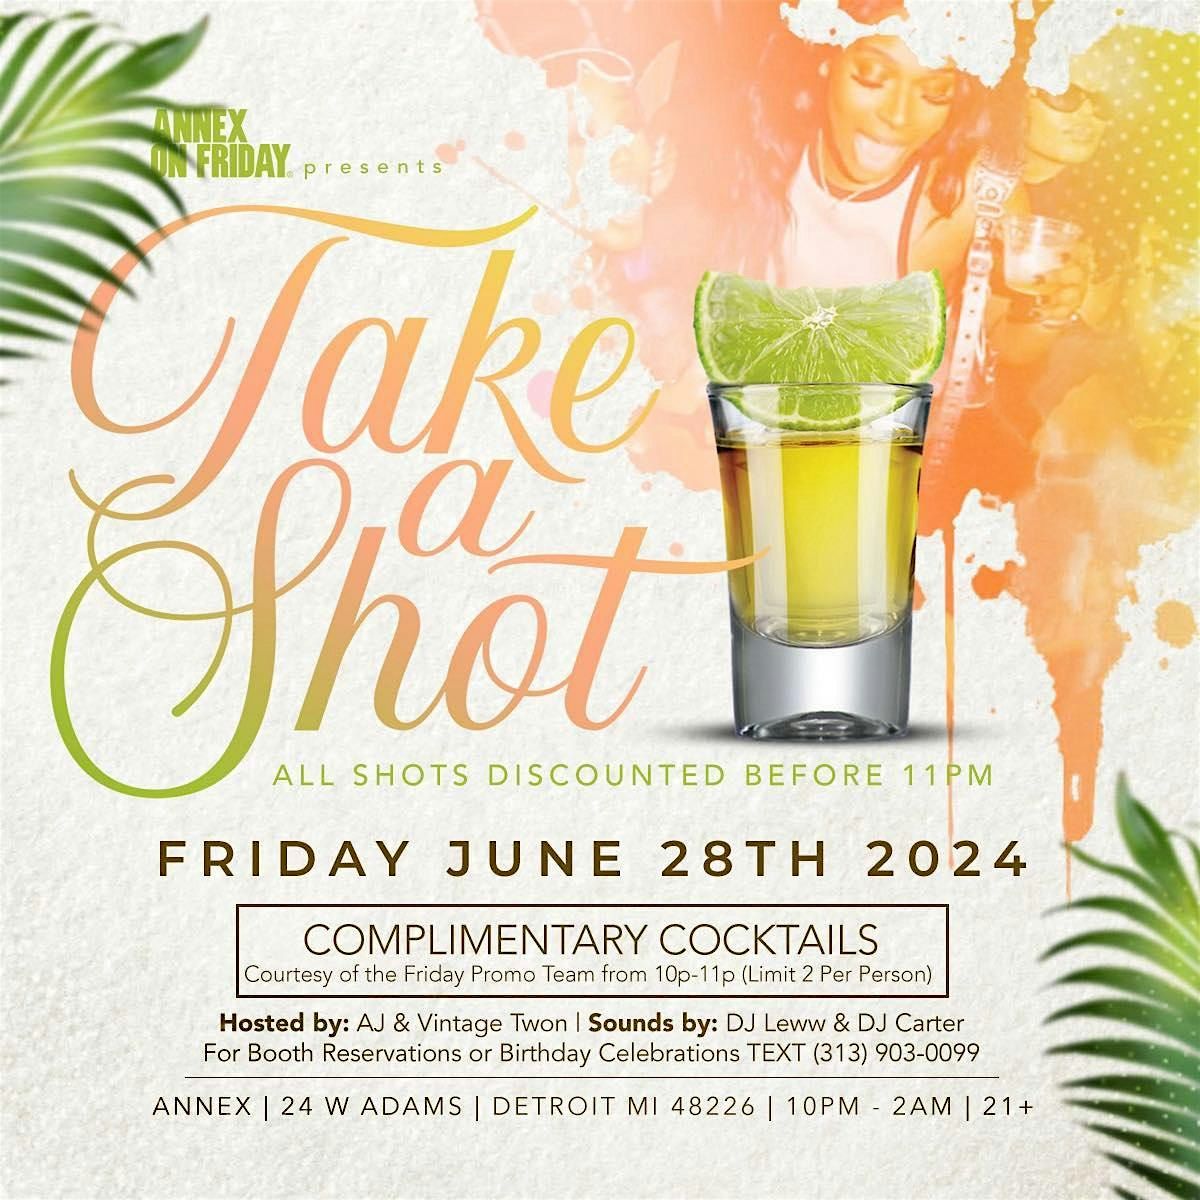 Annex on Friday Presents Take A Shot on June 28